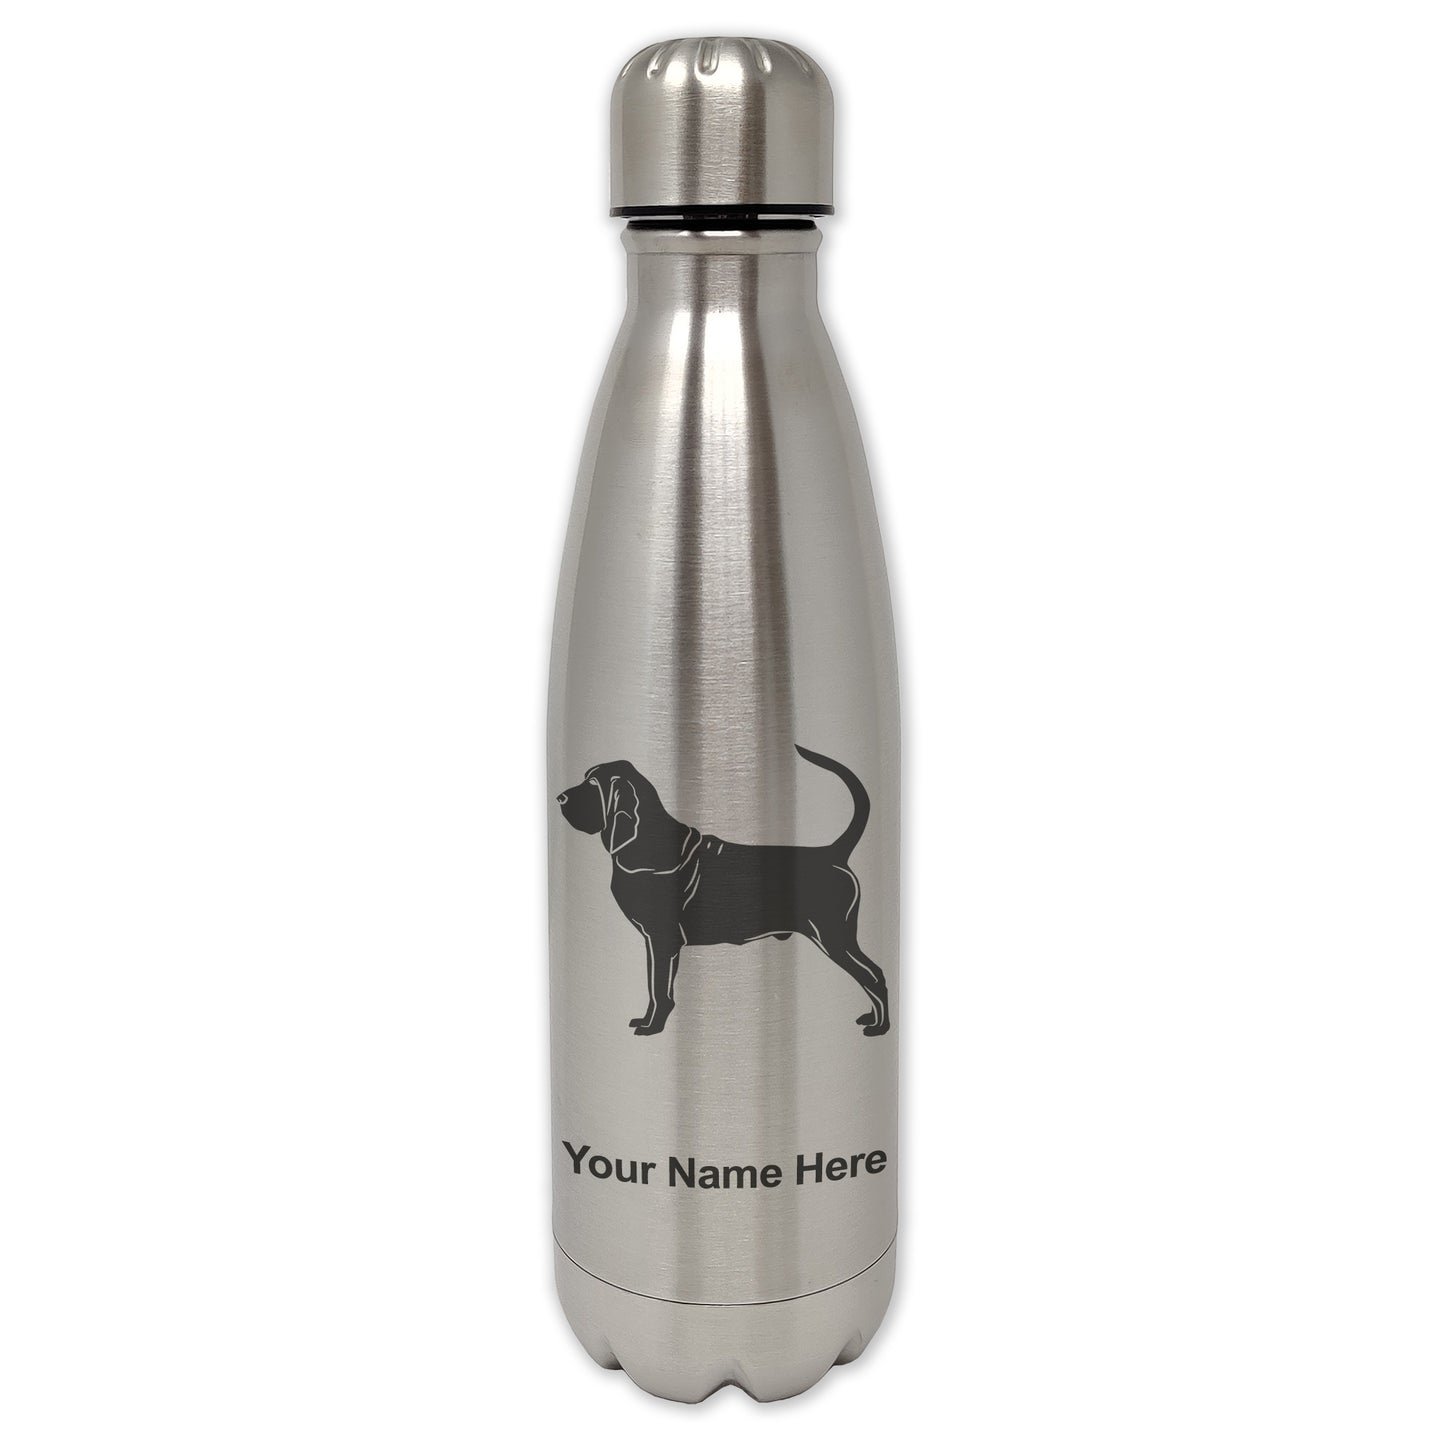 LaserGram Single Wall Water Bottle, Bloodhound Dog, Personalized Engraving Included